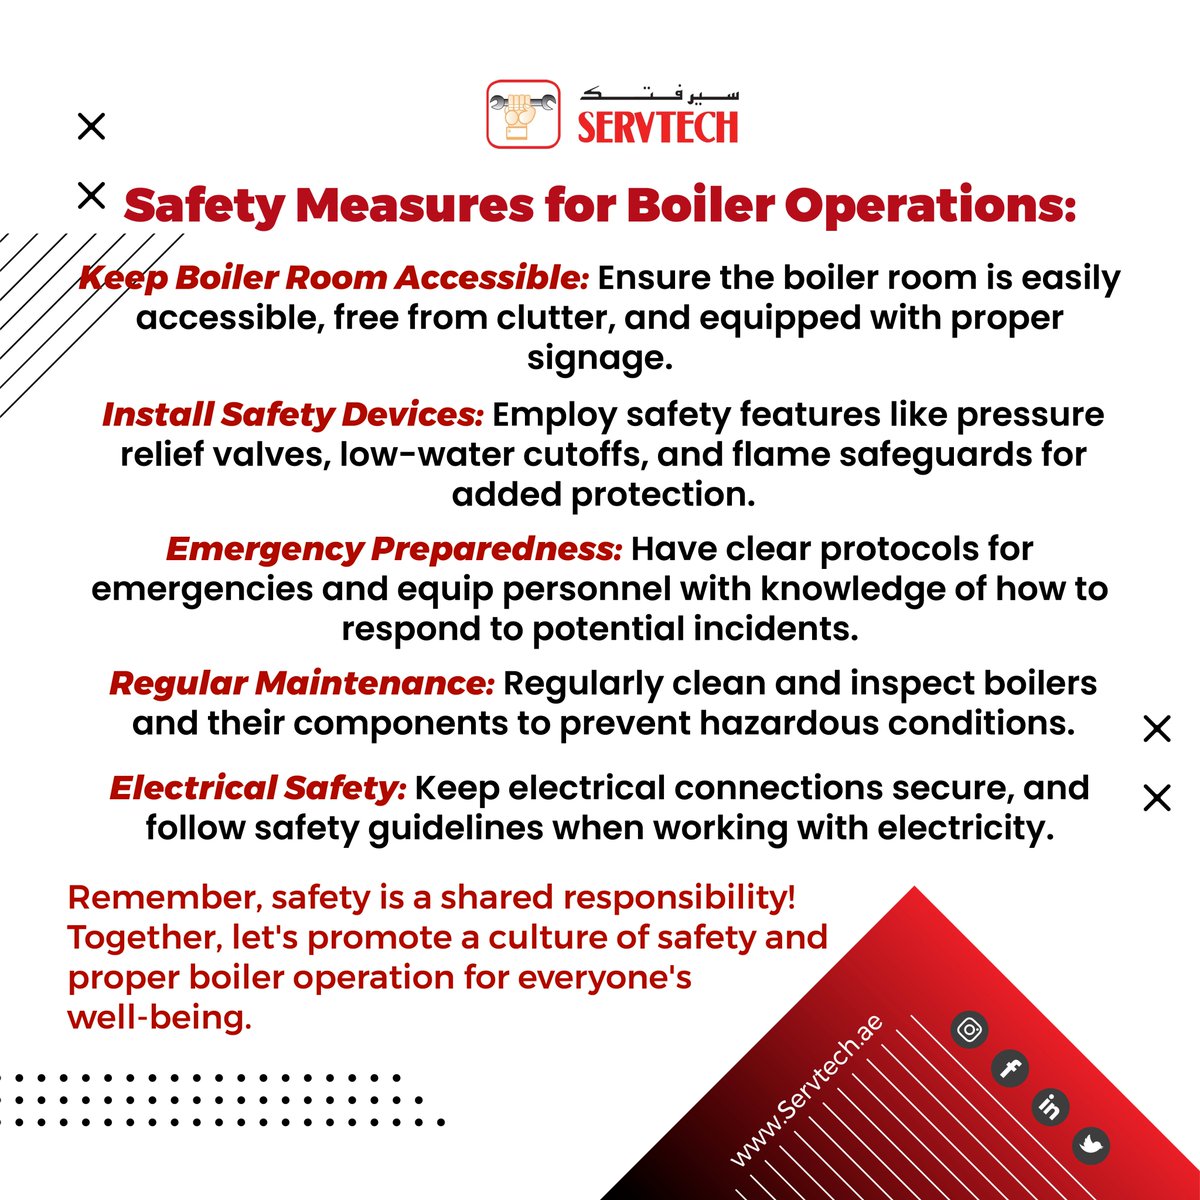 Boiler operations made safe and smart! 🛠️🔥 Remember these best practices for a smooth run and secure workplace. Safety is our priority! 💡🚧 #boilersafety #SmartOperations #safetyfirst #boilersafetytips #BestPractices #safetymatters #industrialsafety #workplacesafety